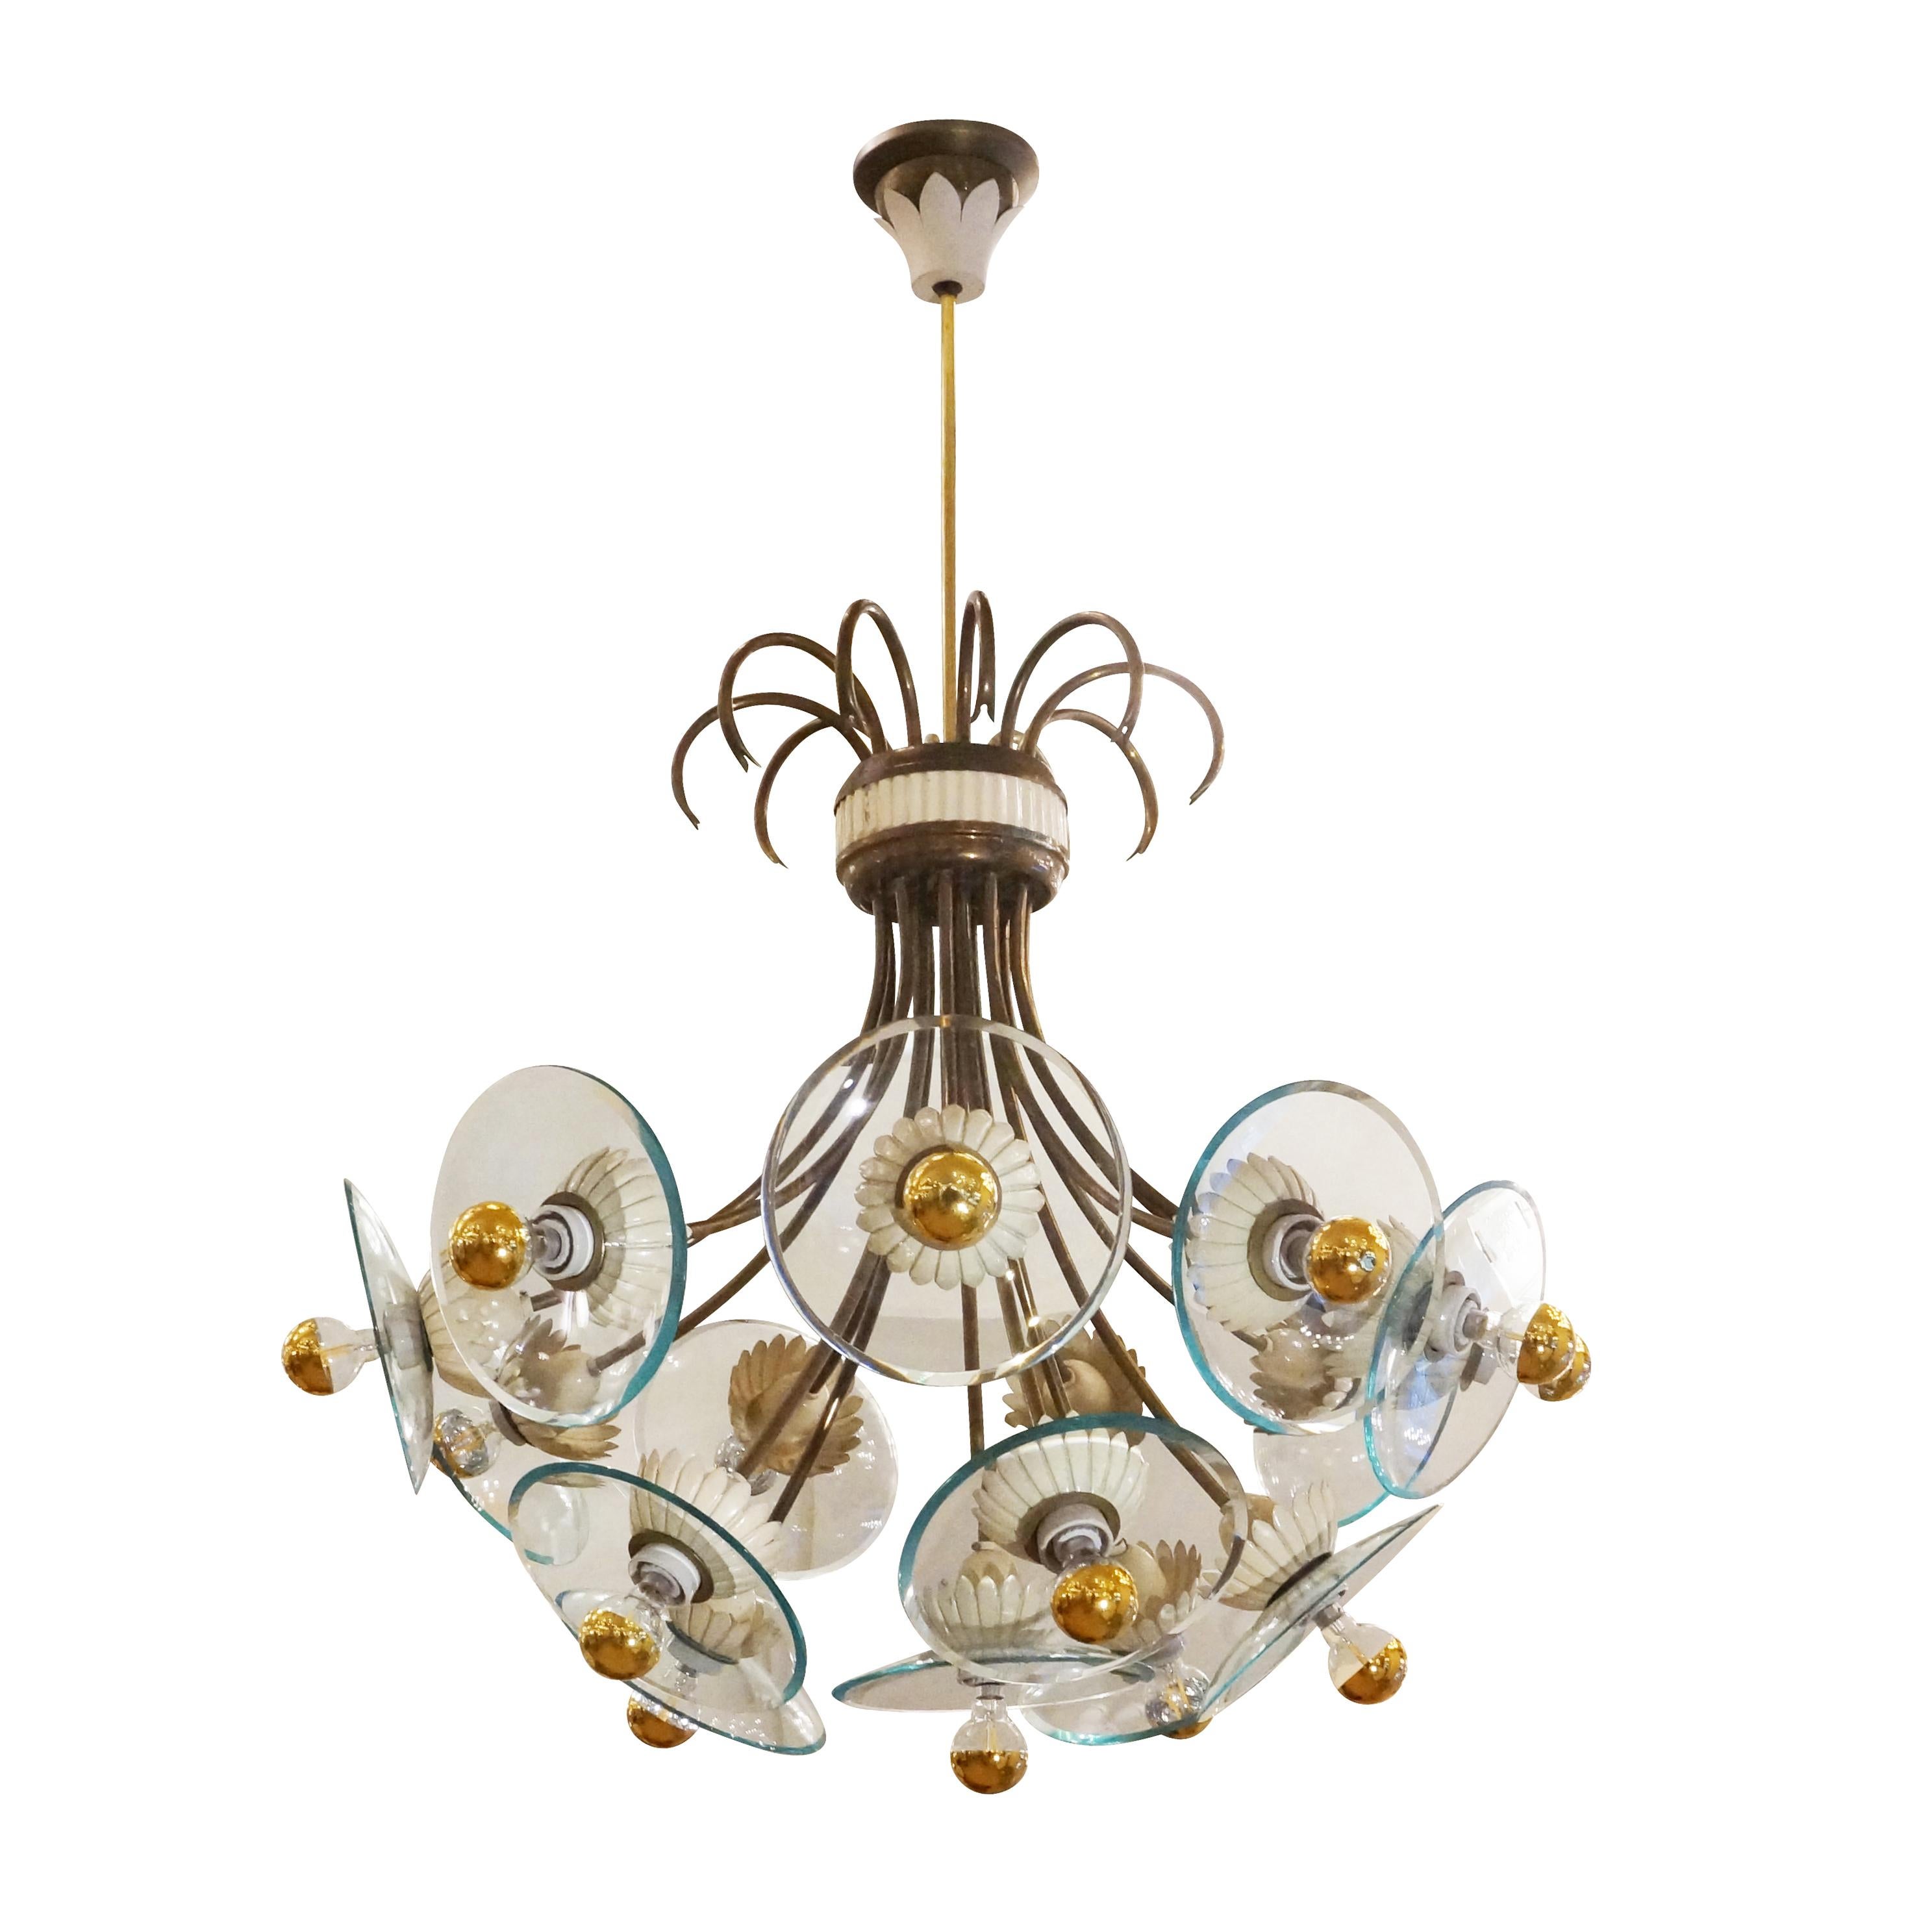 “Floral” Italian Mid-Century chandelier attributed to Pietro Chiesa for Fontana Arte. Curved brass arms terminate with white decorative hardware and clear glass disks. 

Condition: Good vintage condition, minor wear consistent with age and use. 2